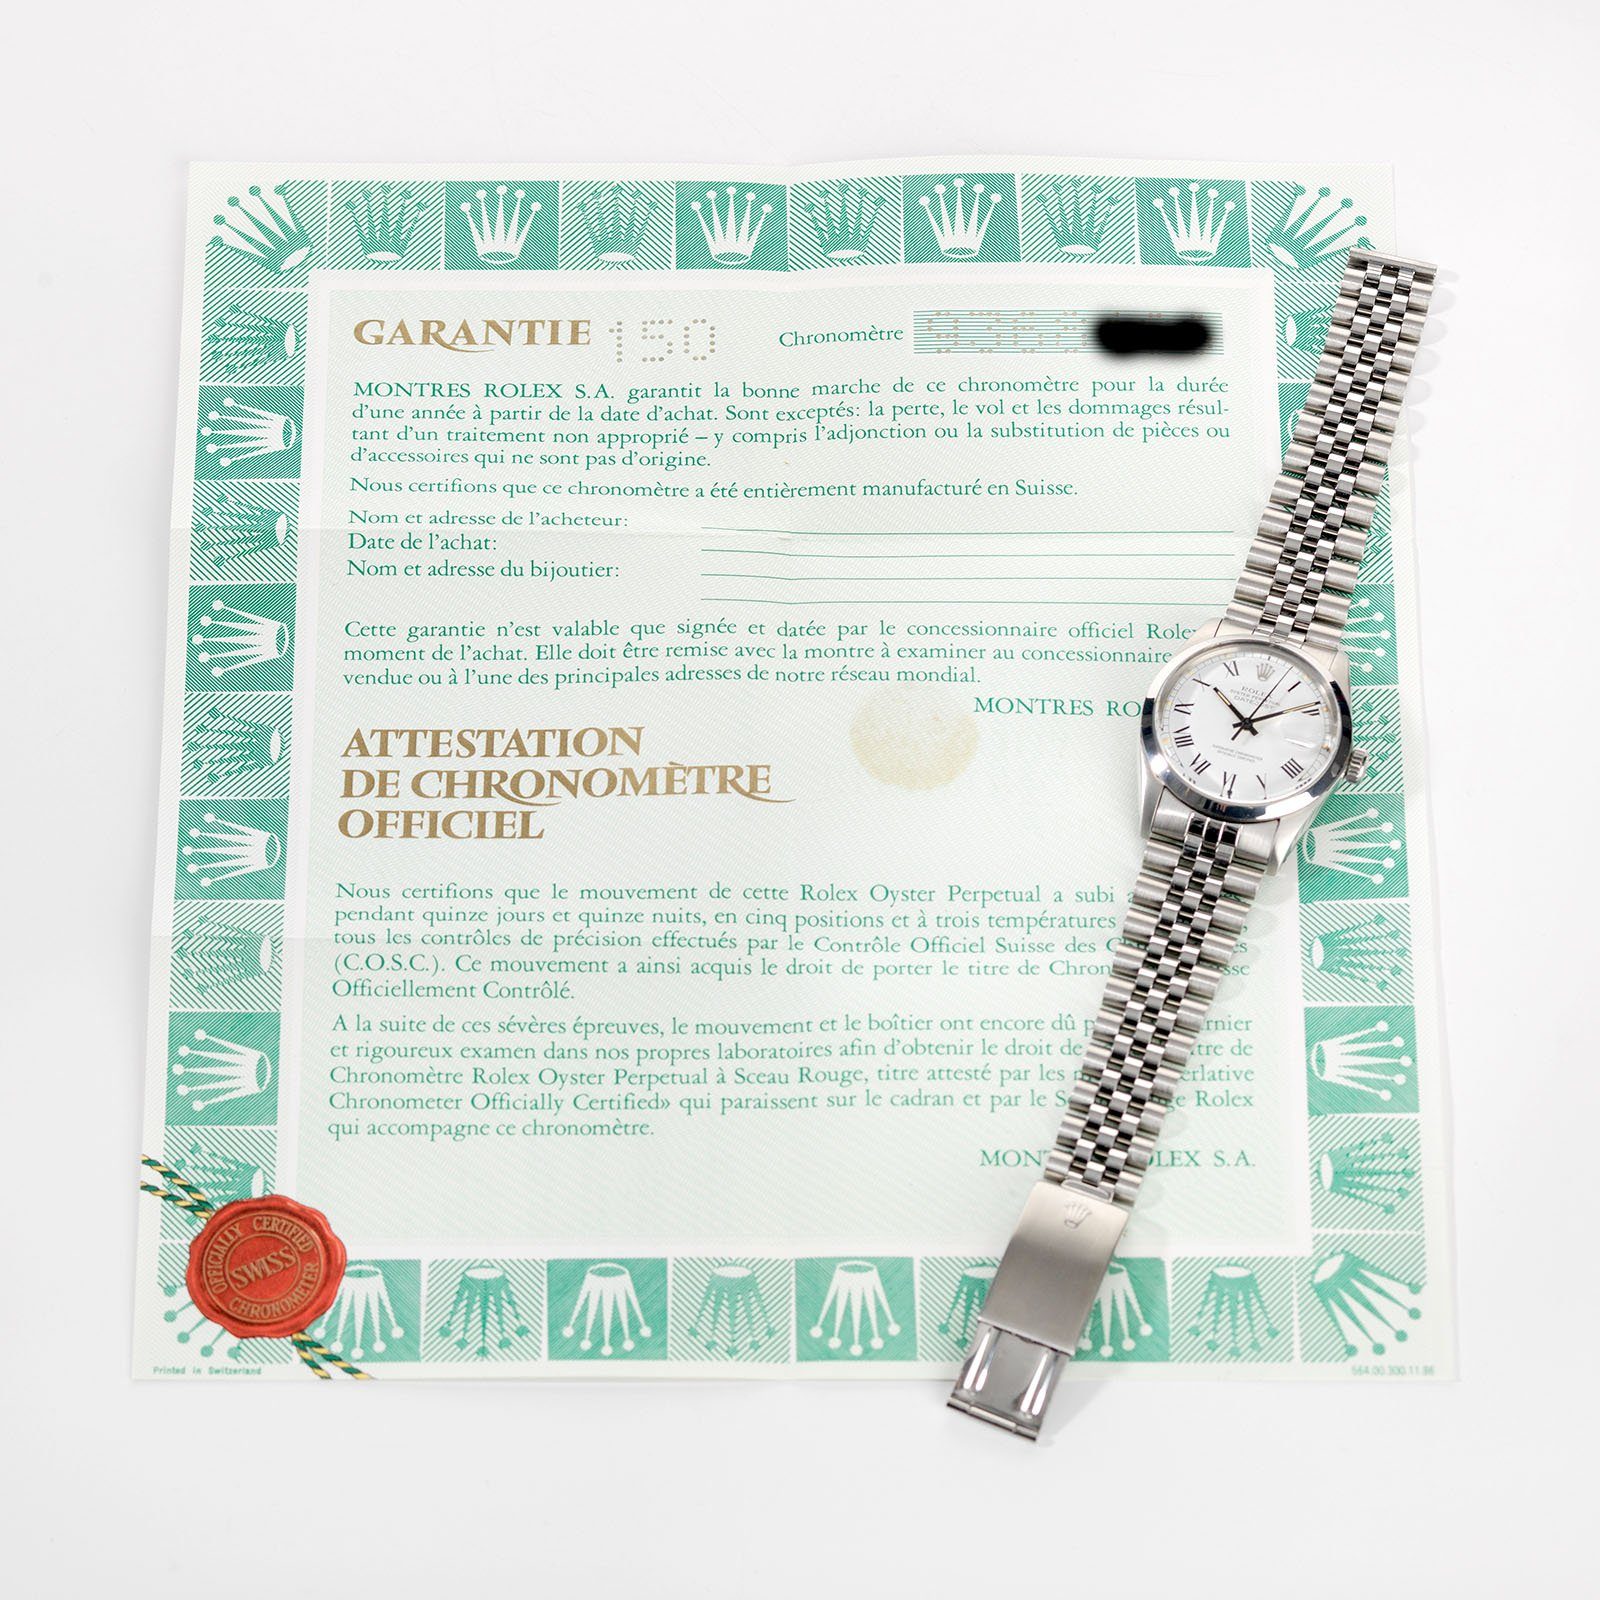 Rolex Datejust Ref. 16000 Buckley Dial with Papers